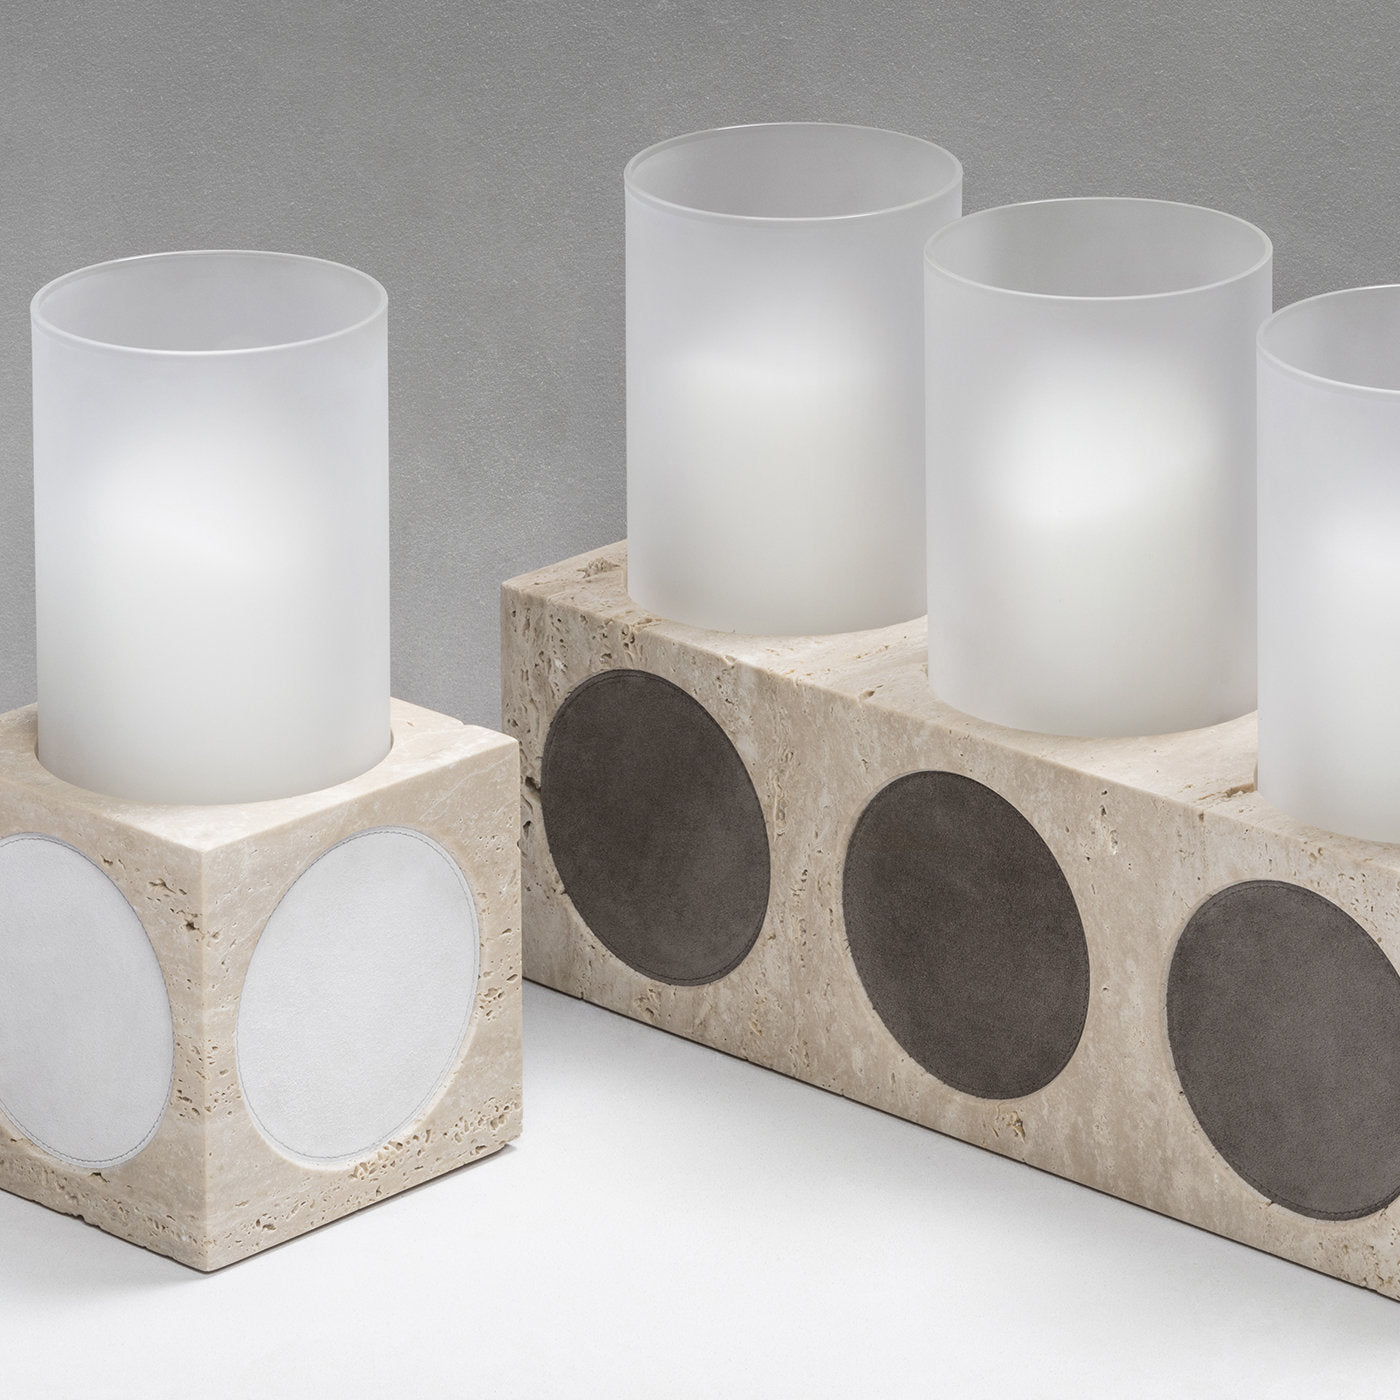 Palazzo Triple Candle holder - Alternative view 1